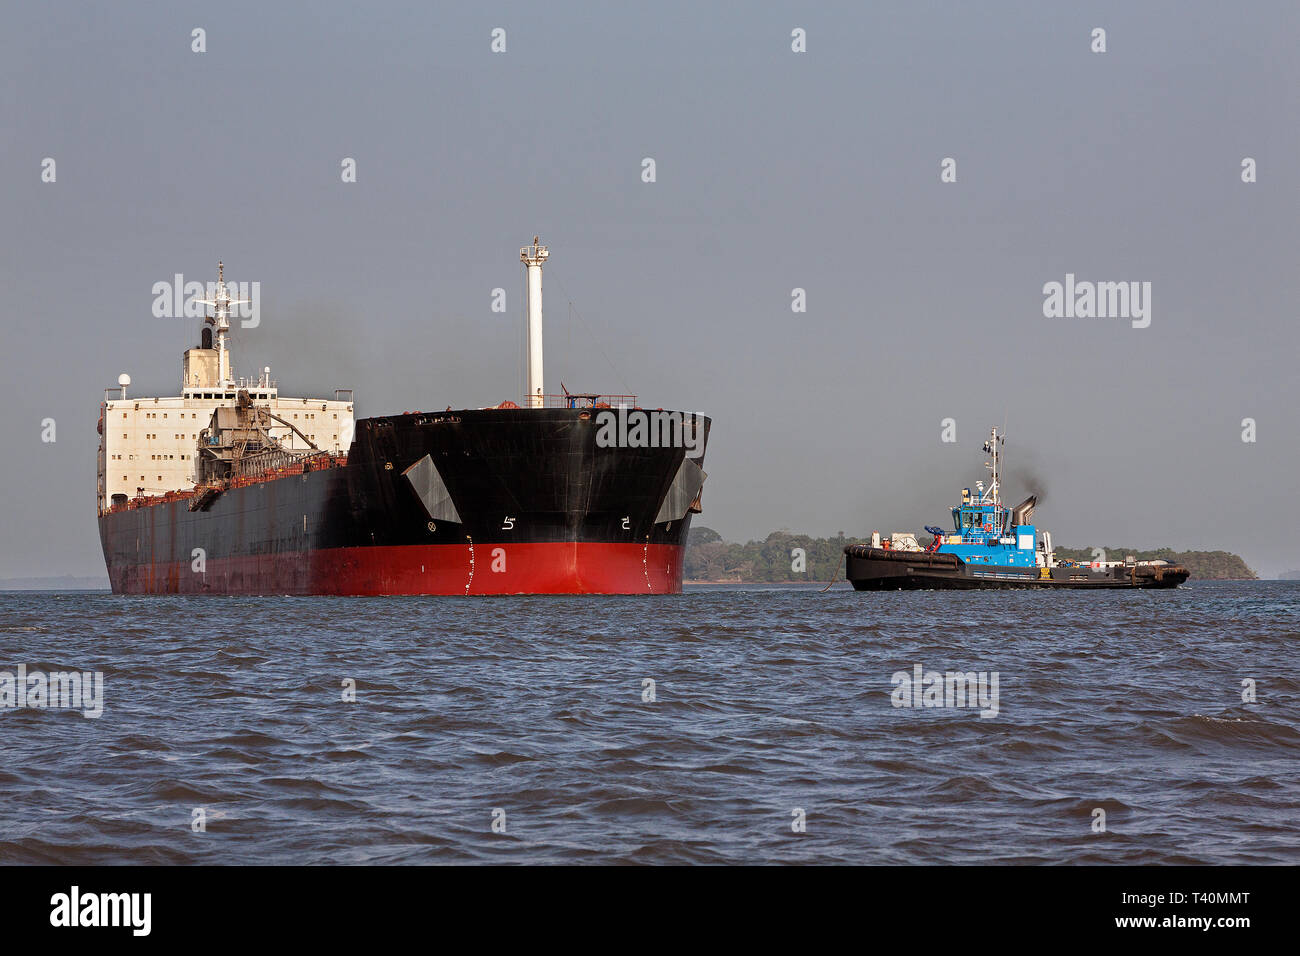 Port operations for managing and transporting iron ore. Transhipping boat and tug prepare to set sail to unload into OGV - Ocean Going Vessel at sea Stock Photo